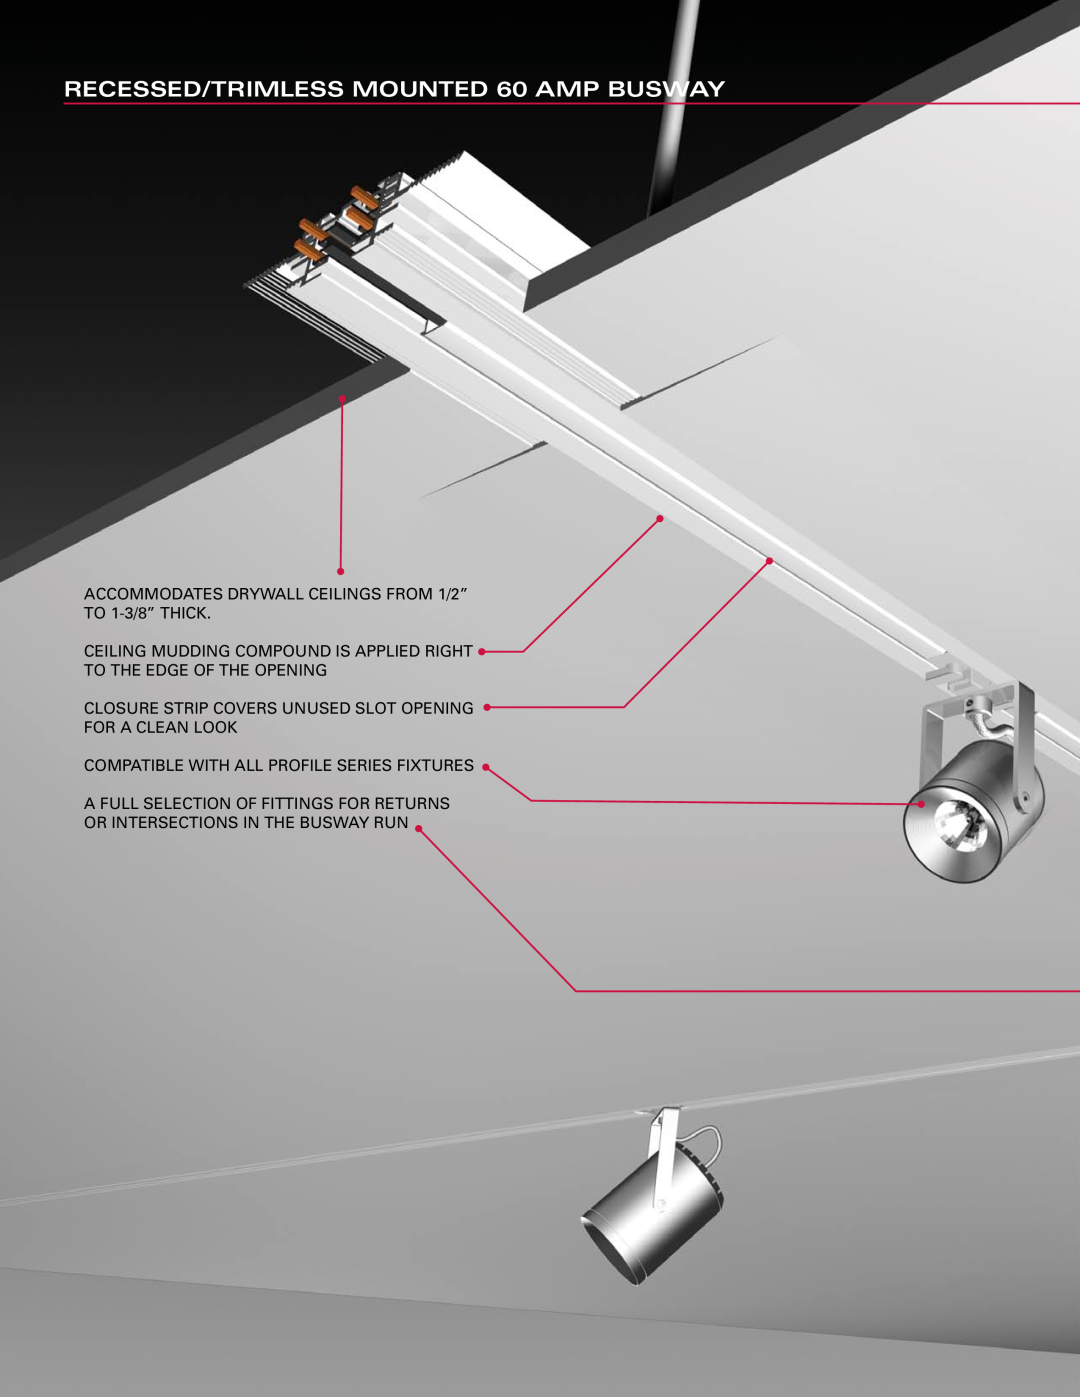 Profile manual RECESSED/TRIMLESS MOUNTED 60 AMP BUSWAY, ACCOMMODATES DRYWALL CEILINGS FROM 1/2”, TO 1-3/8”THICK 